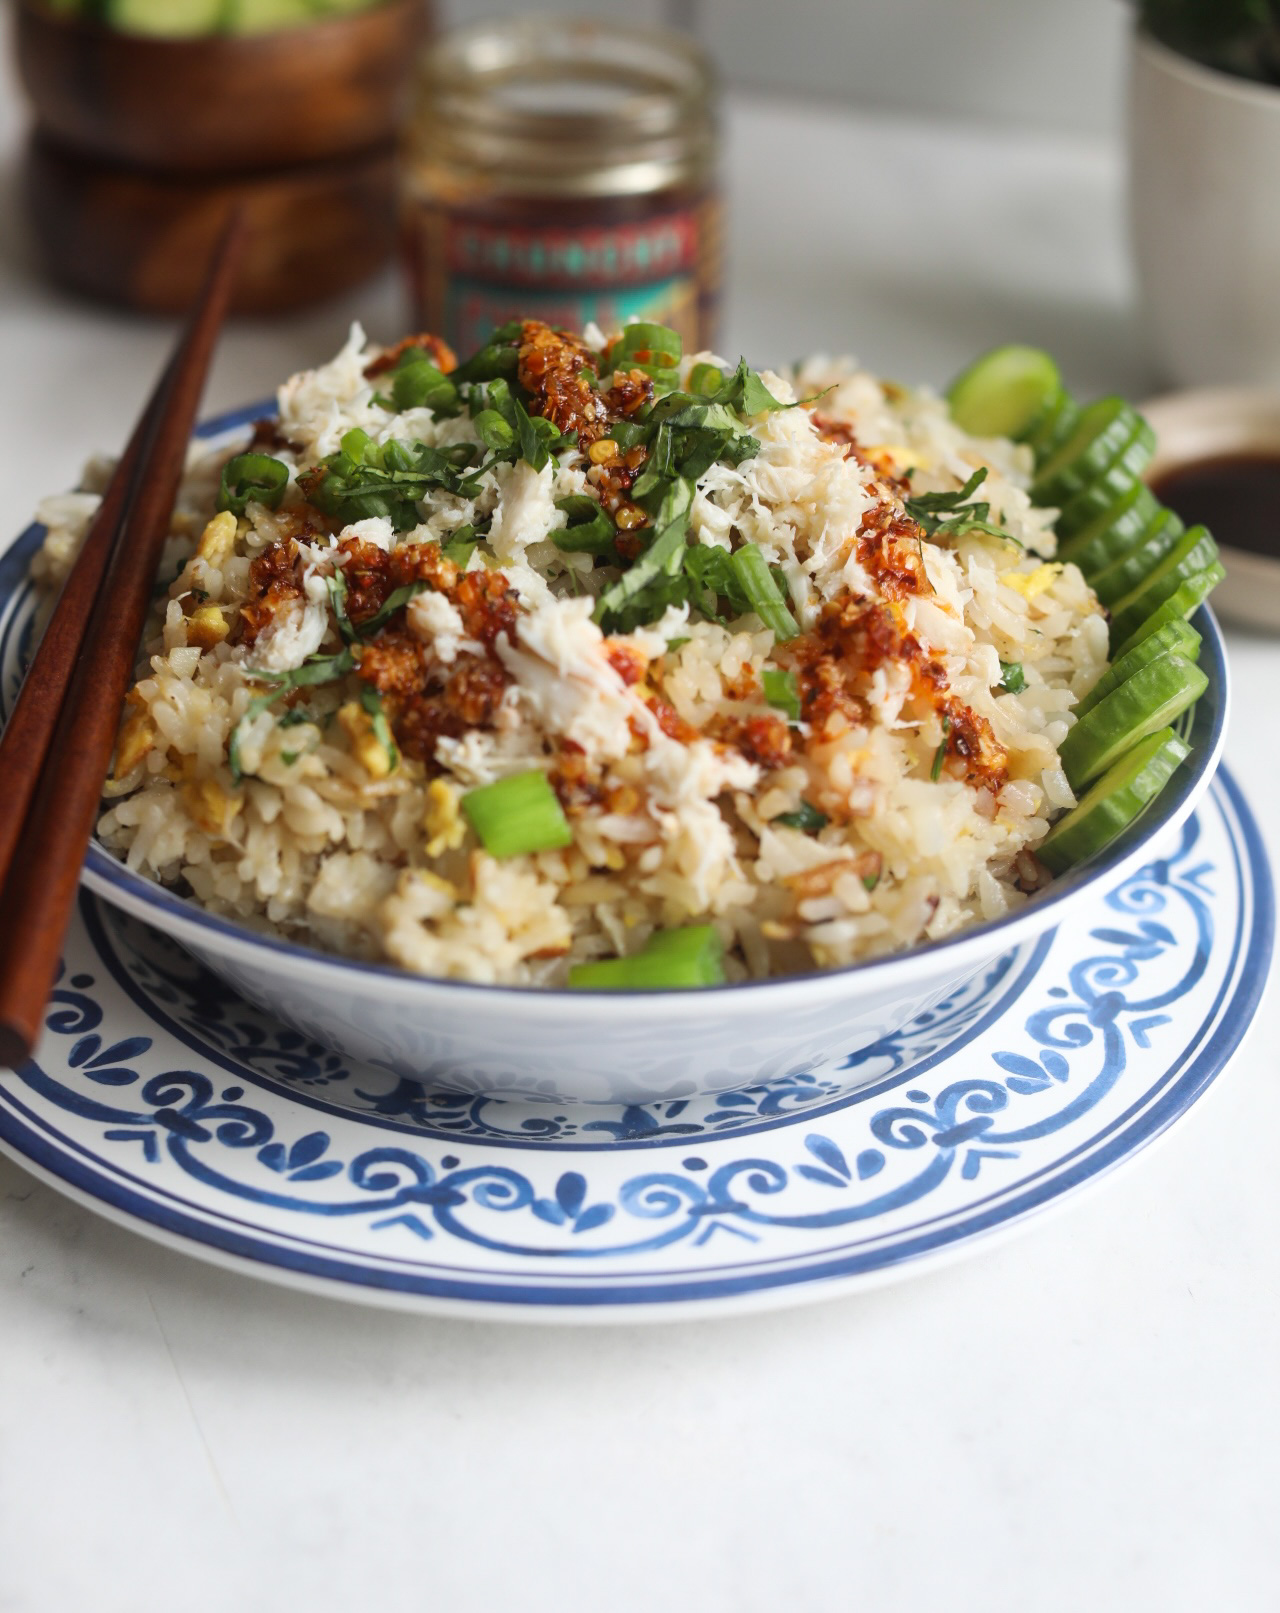 Crab fried rice in a blue and white decorative bowl garnished with sliced cucumber, green onion and cilantro. Brown chopsticks on the left side of the bowl for garnish.